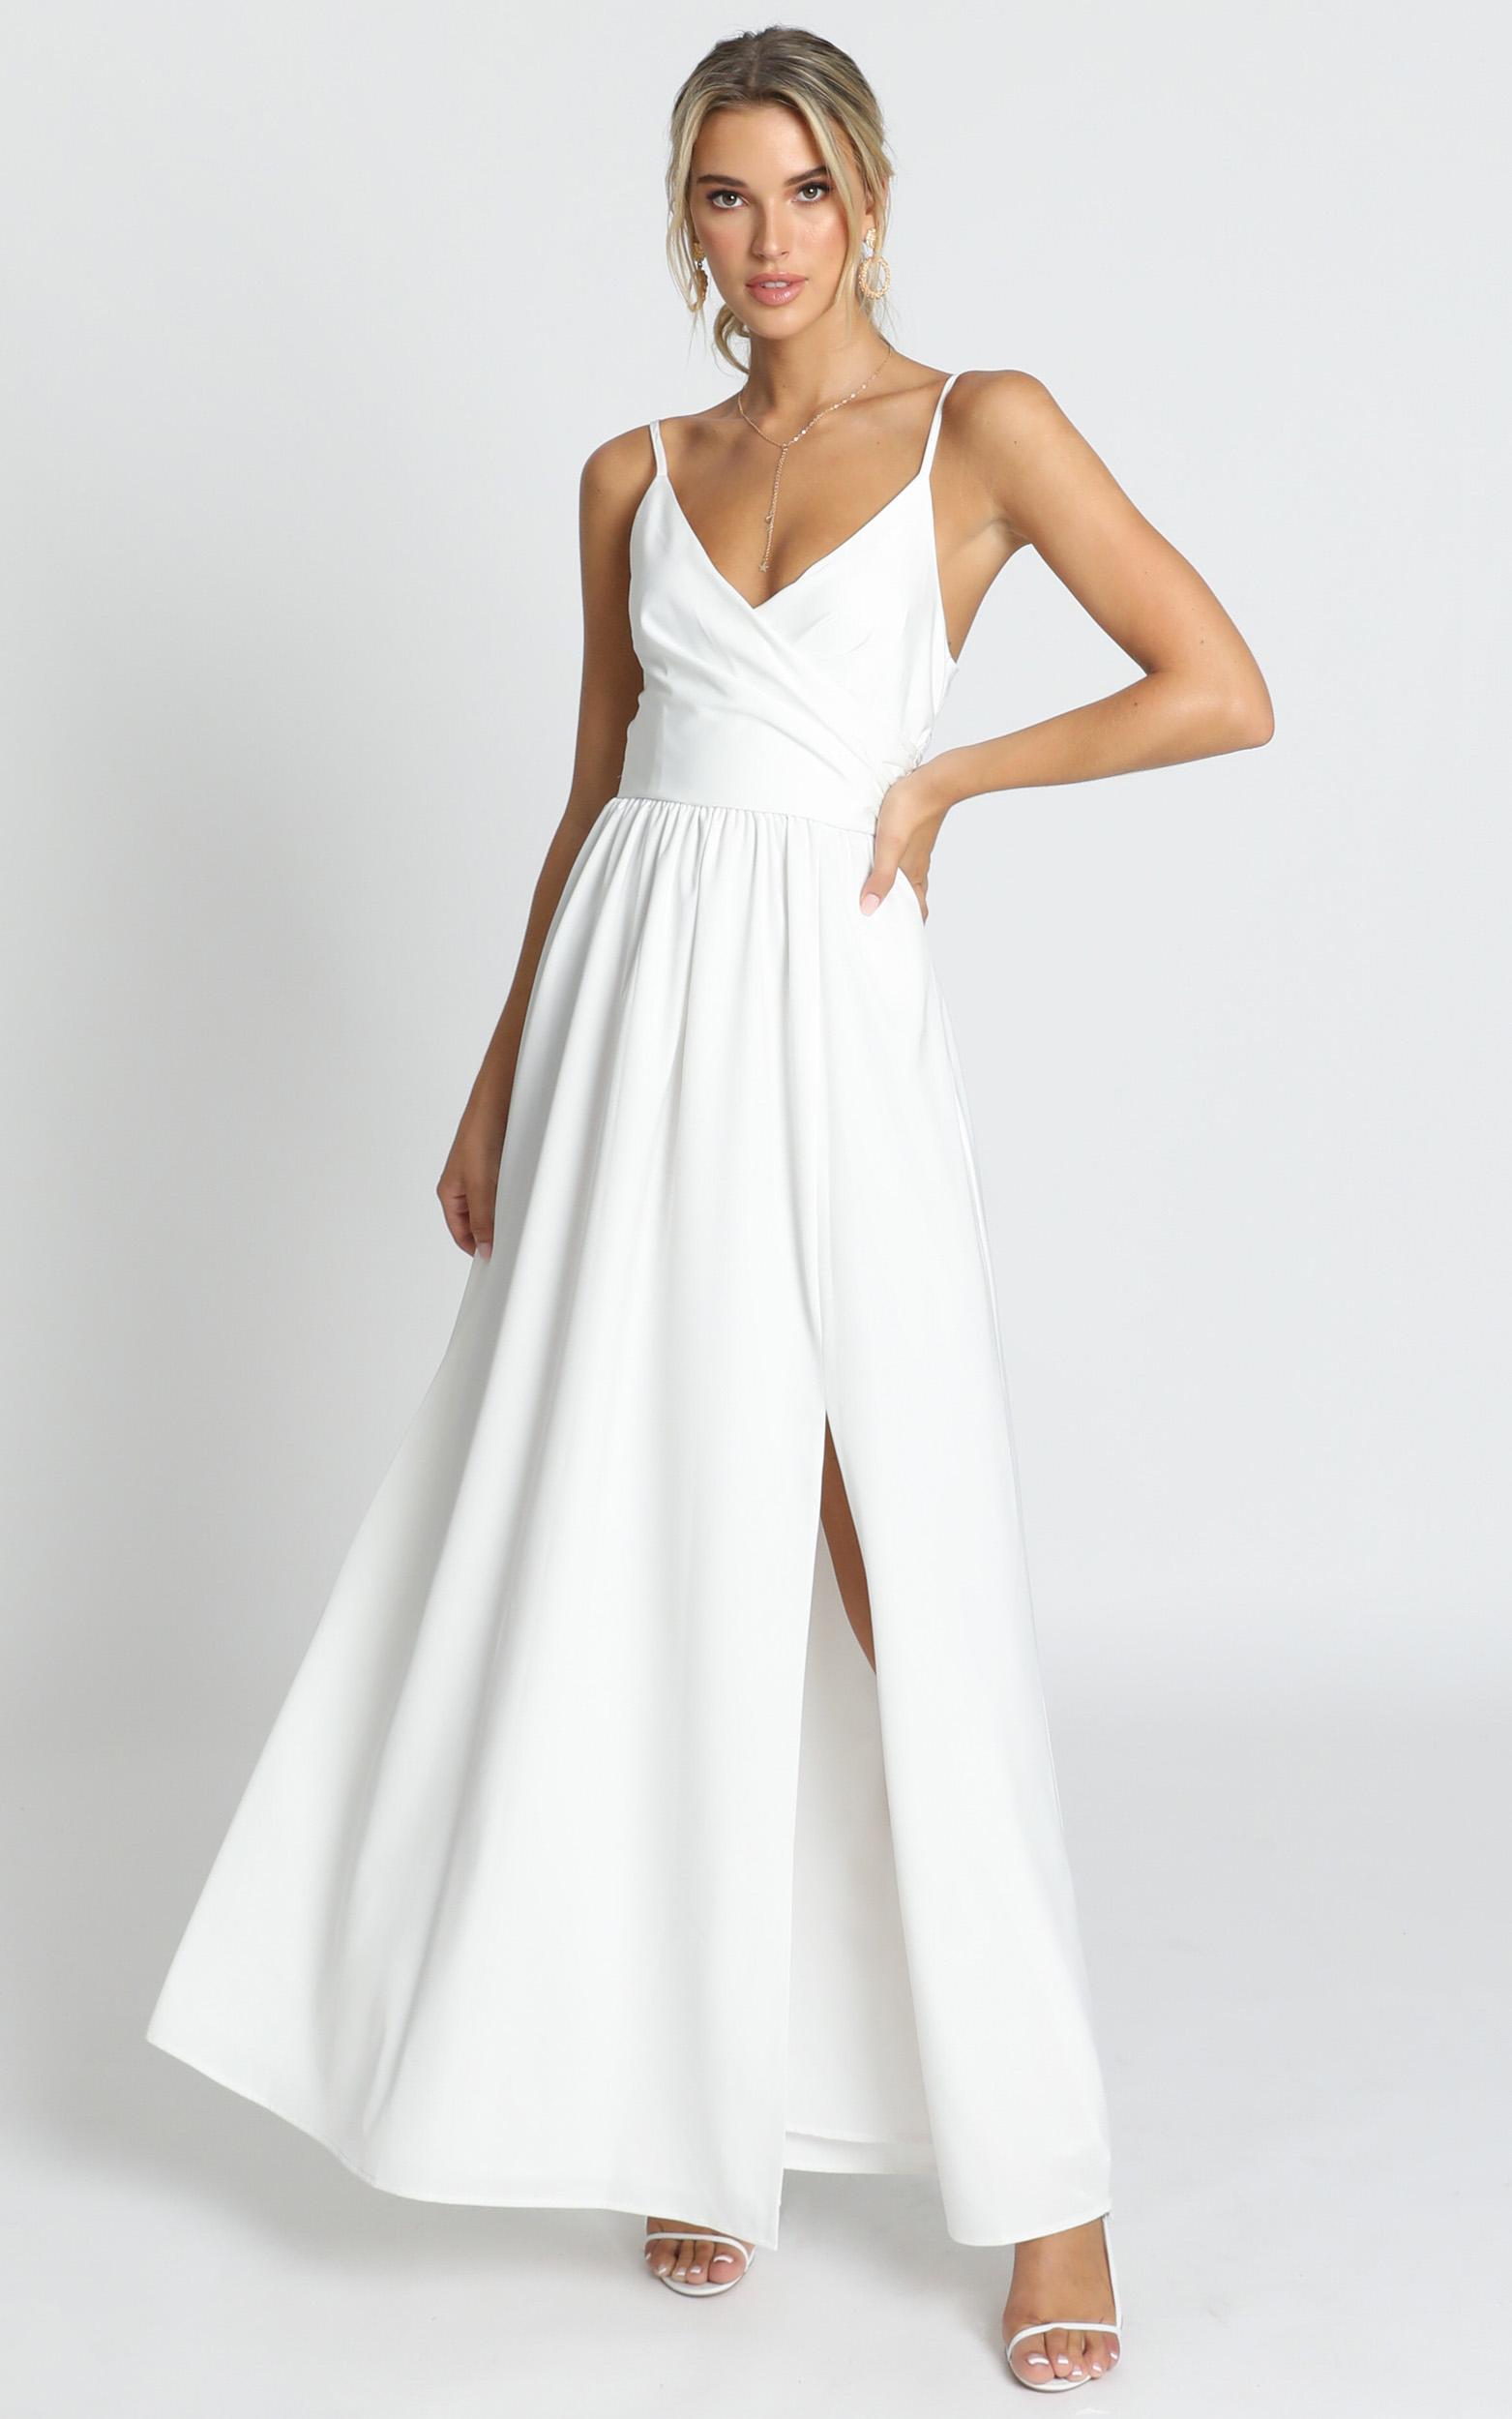 Revolve Around Me Dress in White - 14, WHT8, hi-res image number null